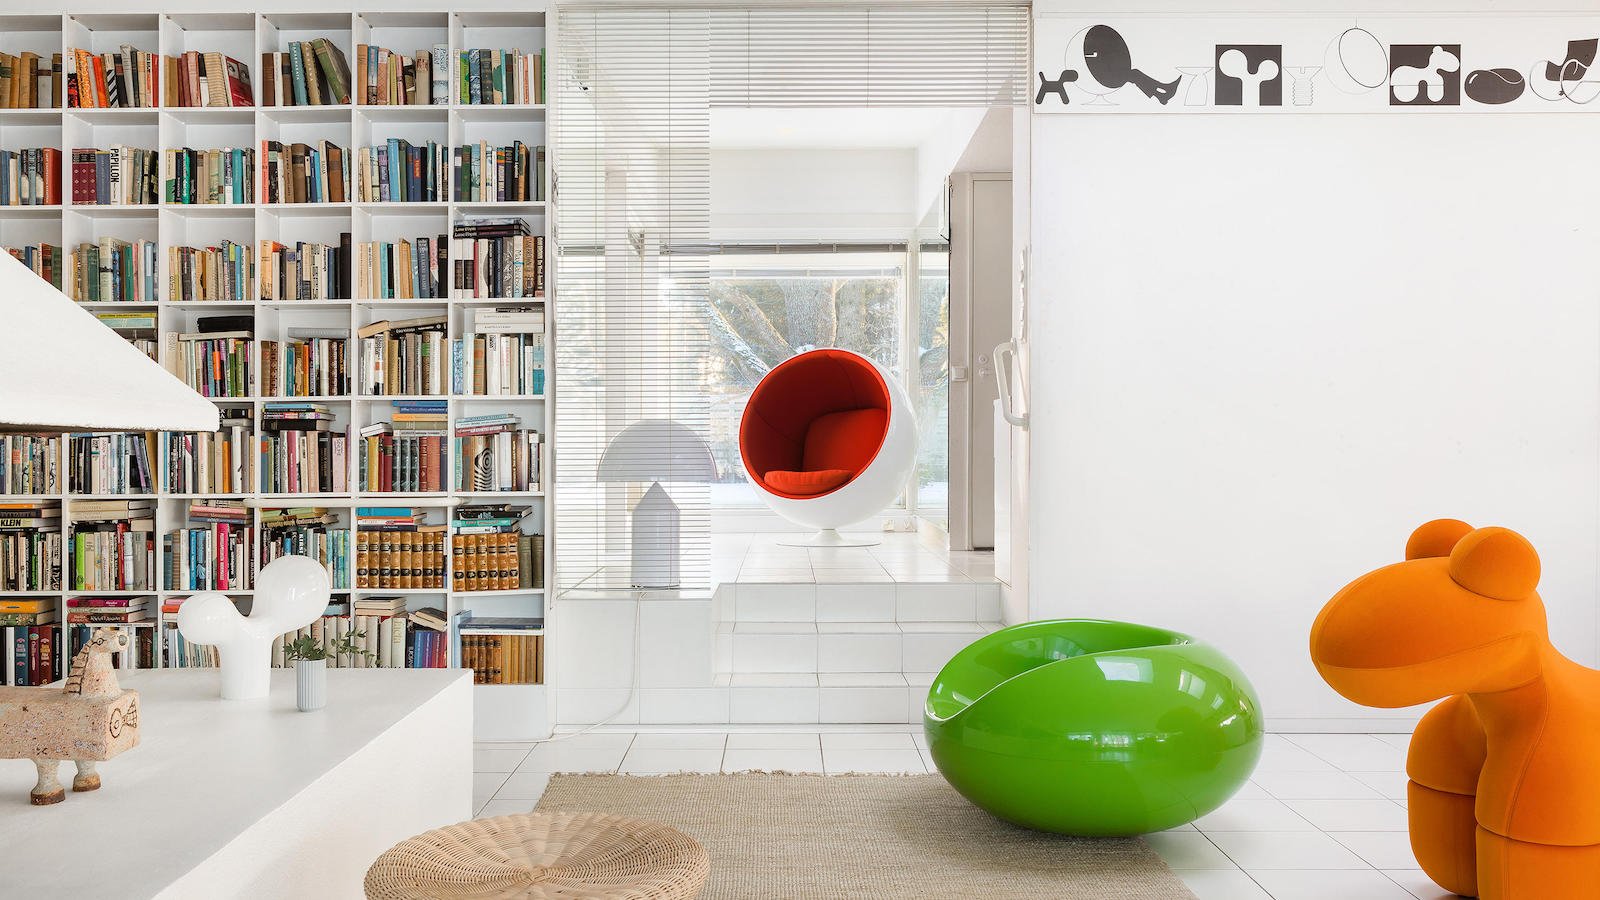 Eero Aarnio Fiberglass Ball Chair seats two people in a snug environment with no corners